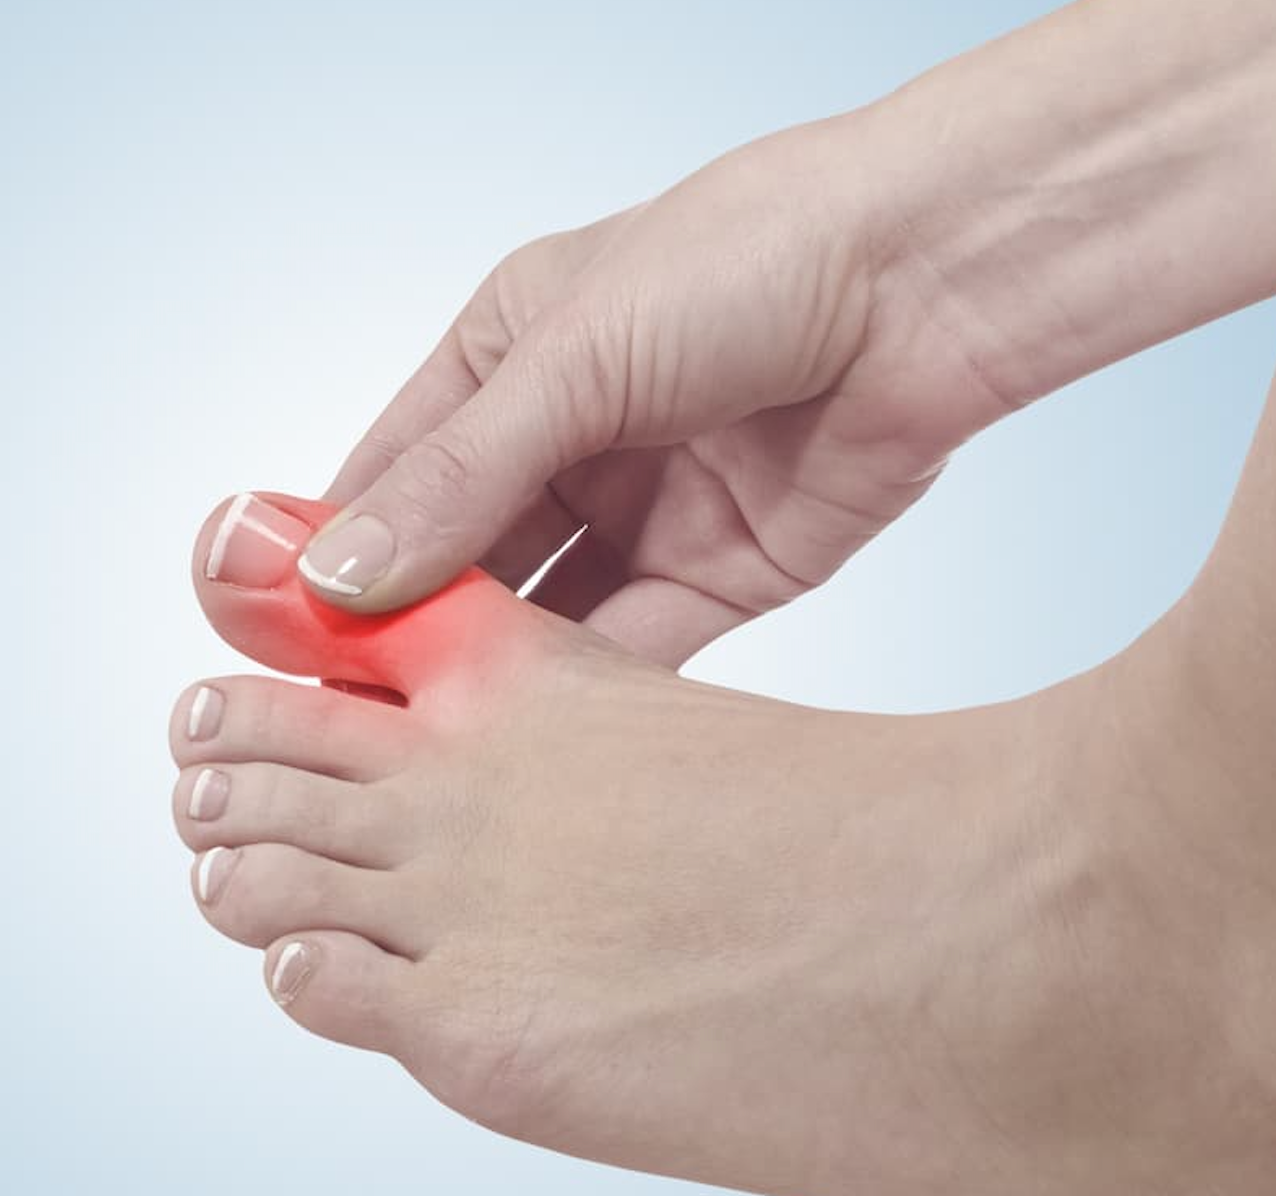 Decreased Dementia Rates Observed in Patients With Gout